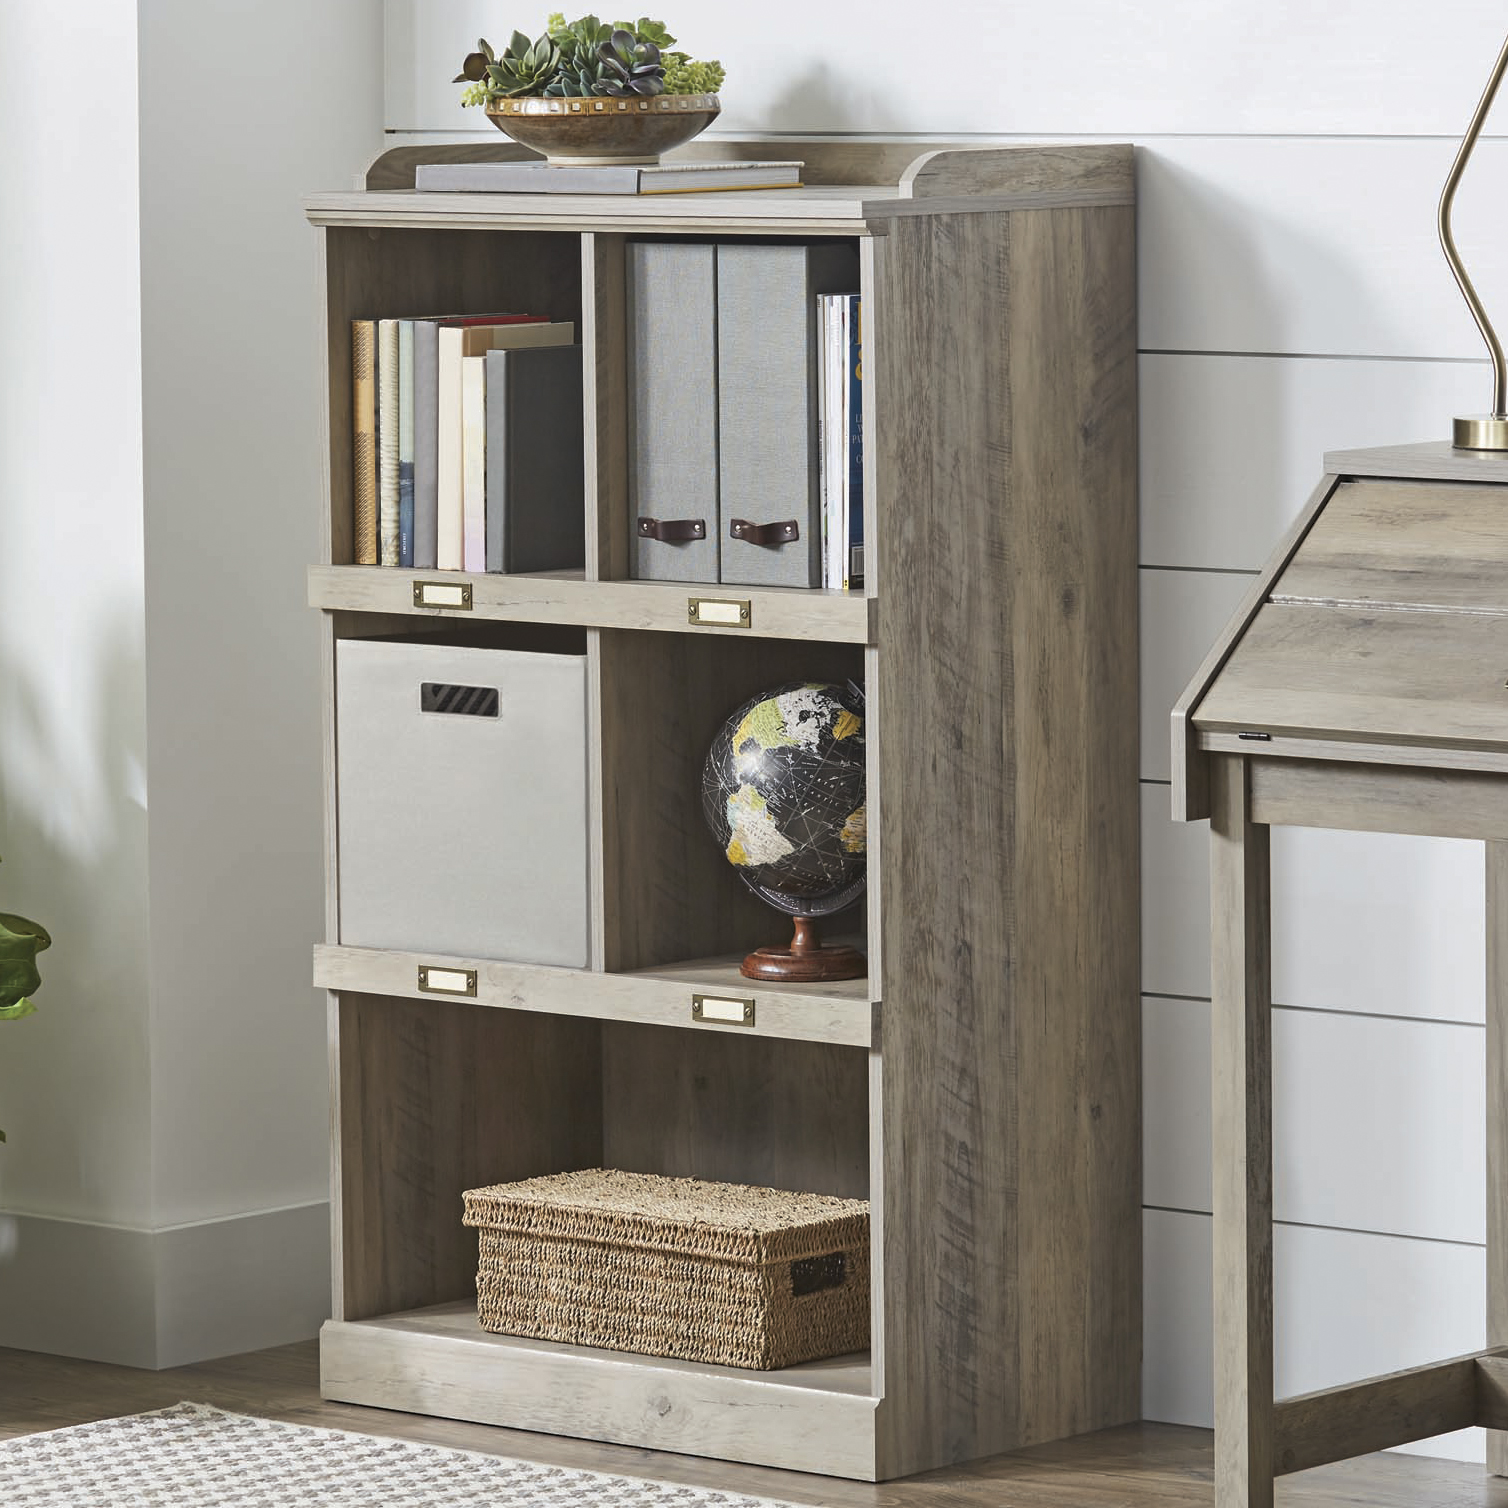 Better Homes & Gardens Modern Farmhouse 5-Cube Organizer Bookcase with Name Plates, Rustic Gray Finish - image 4 of 7